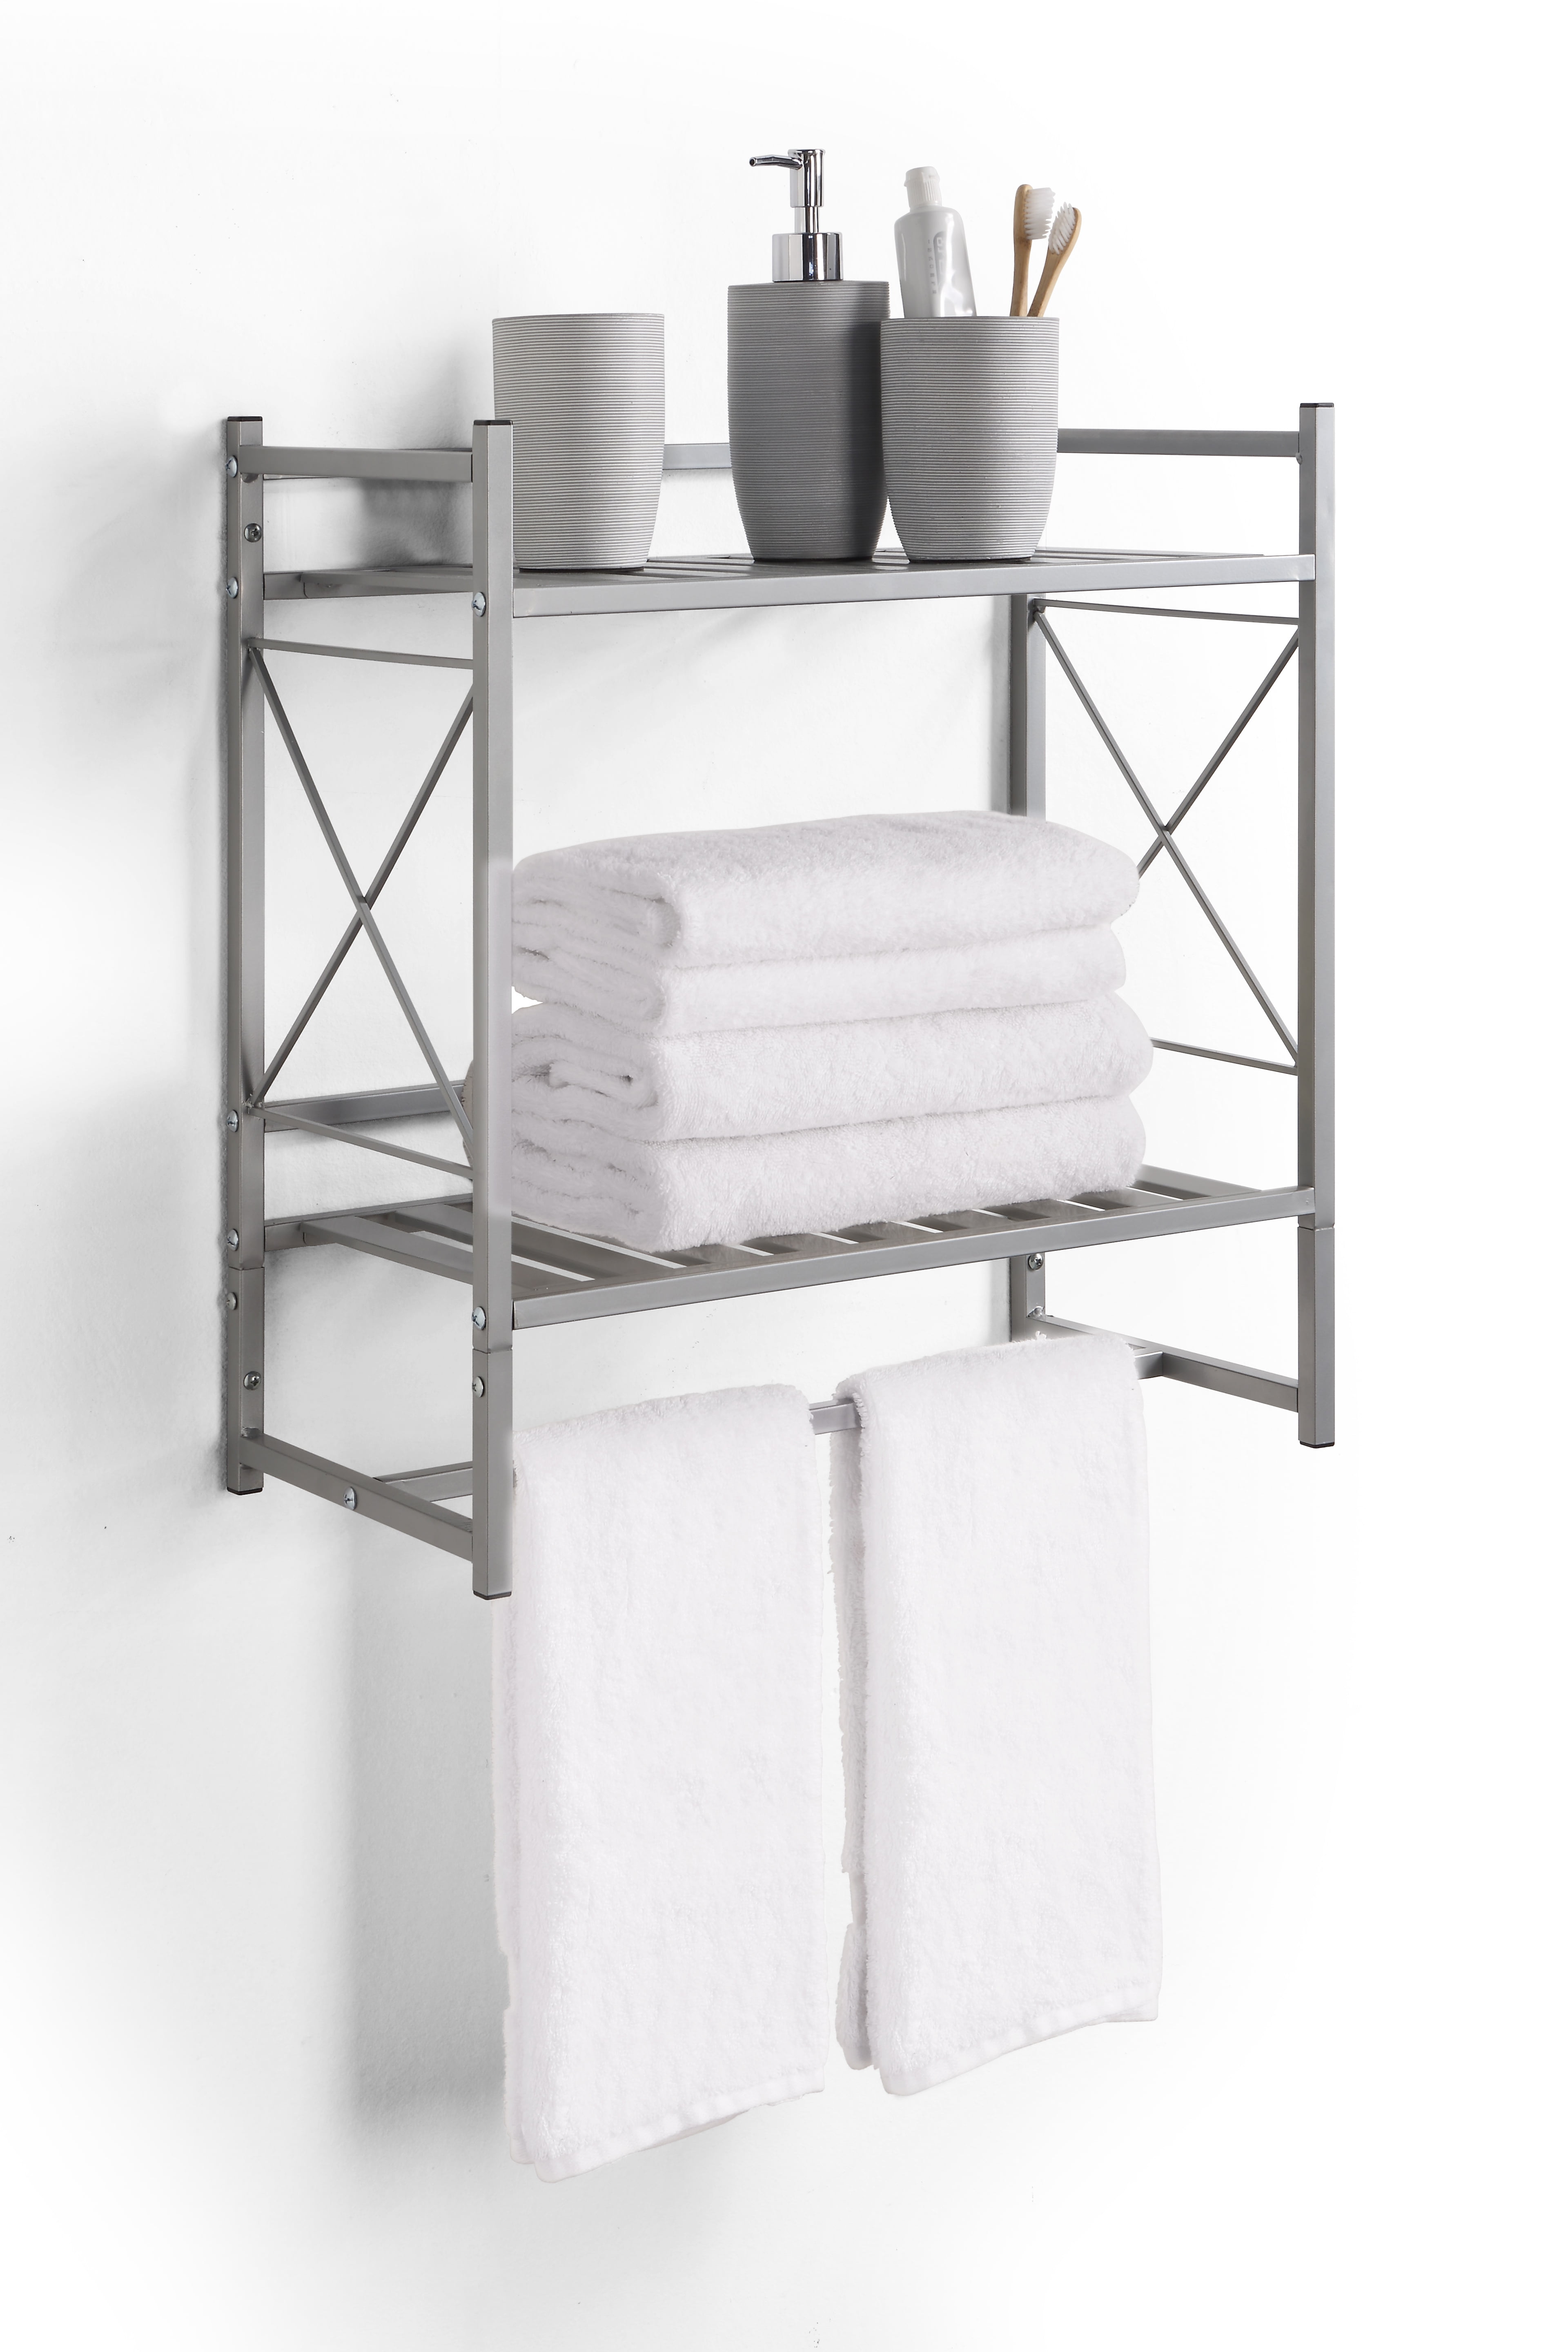 GeekDigg Bathroom Glass Shelf with Towel bar, 2 Tier Wall Mounted Tempered  Glass Shower Storage Organizer with 8MM Extra Thick, 15.2 by